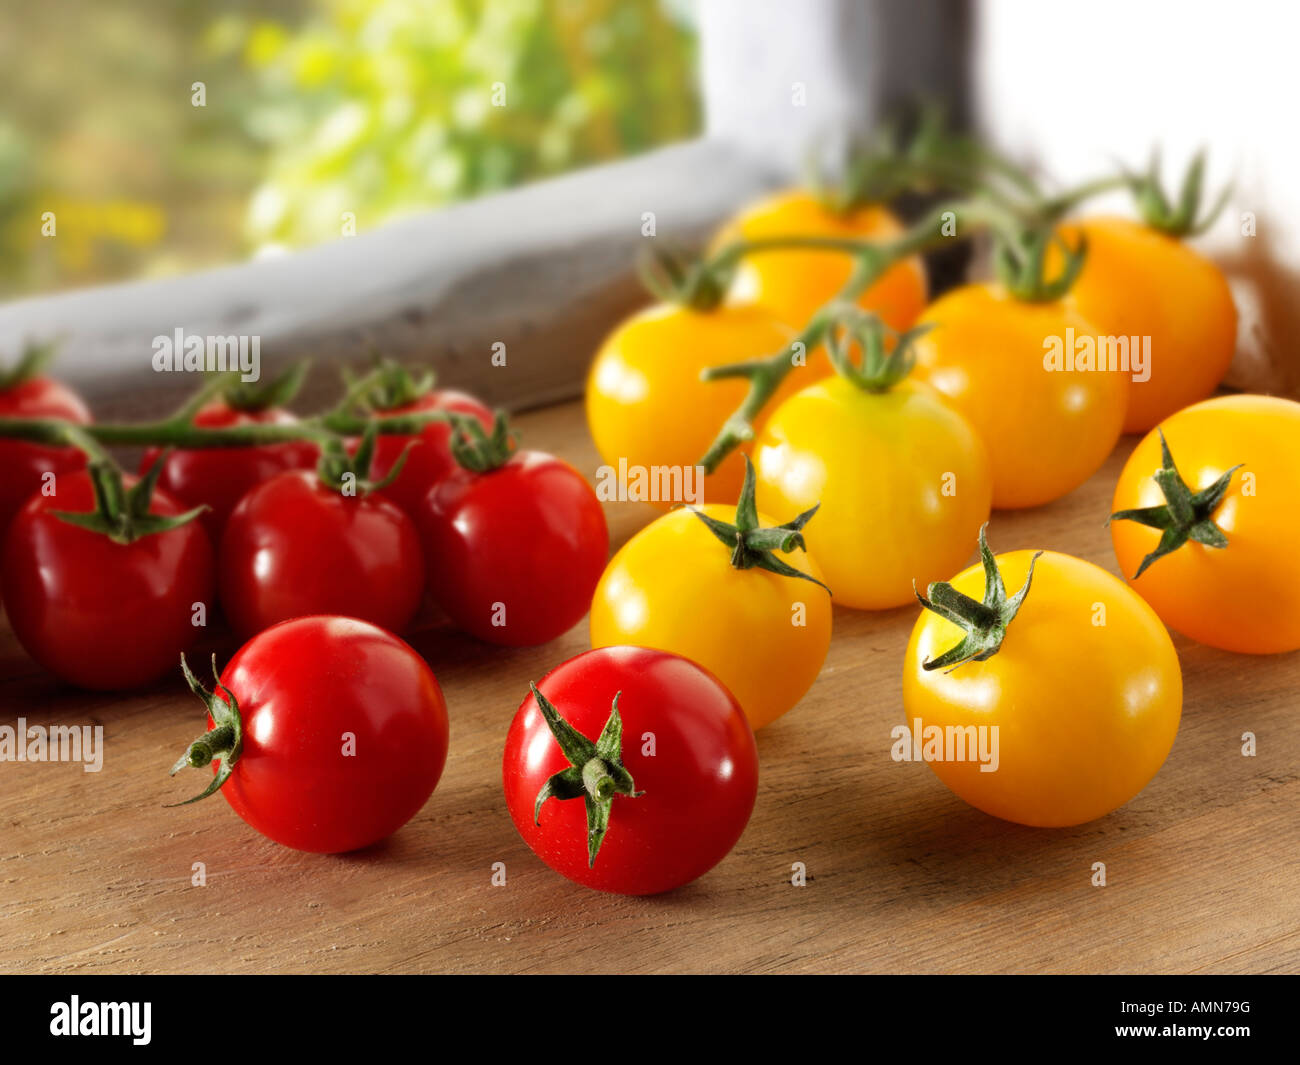 Red and Yellow Tomatoes on the vine Stock Photo